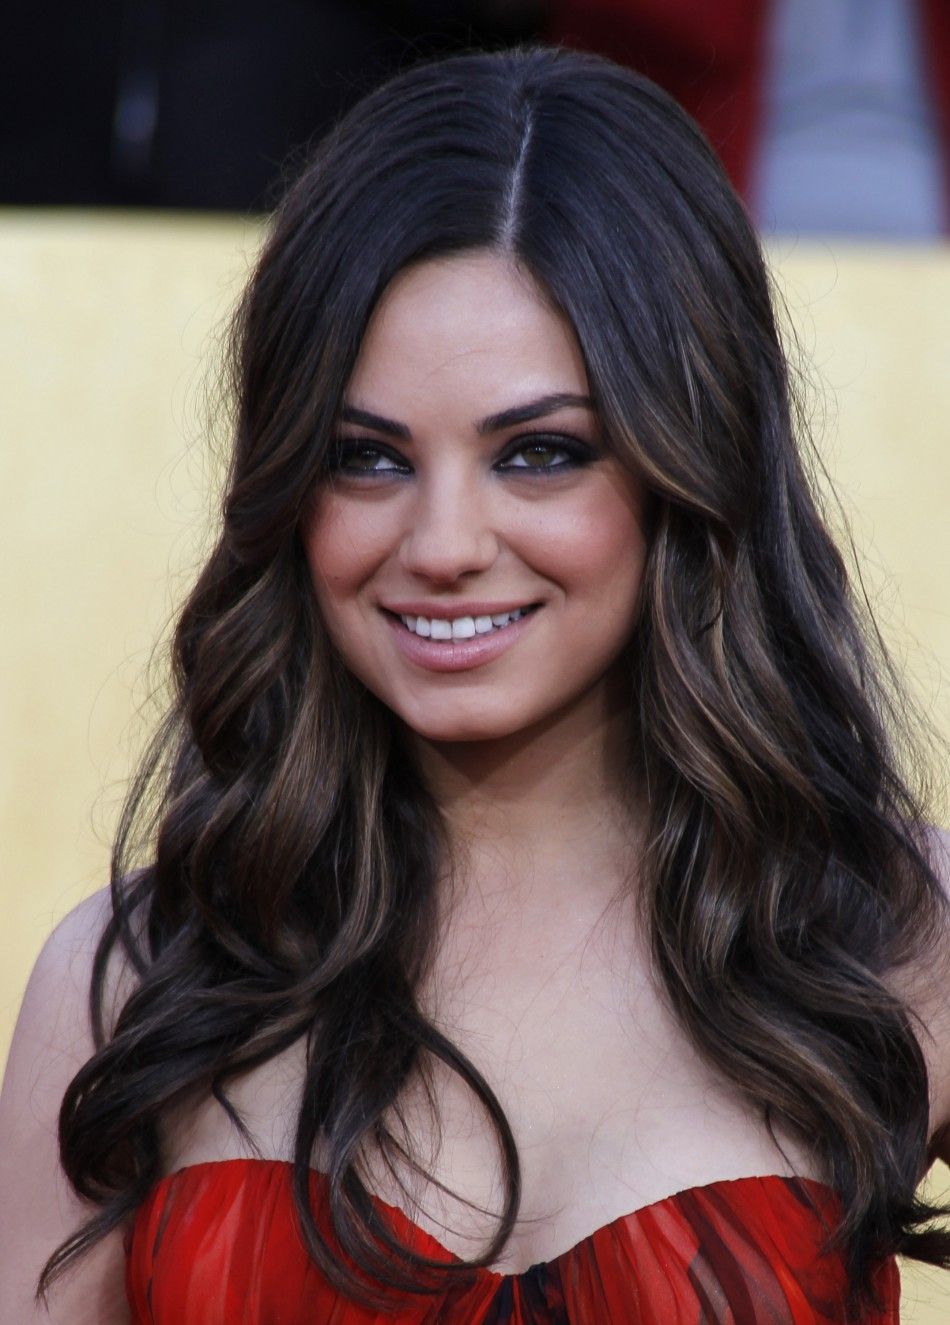 Actress Kunis from the film quotBlack Swanquot poses at the 17th annual Screen Actors Guild Awards in Los Angeles